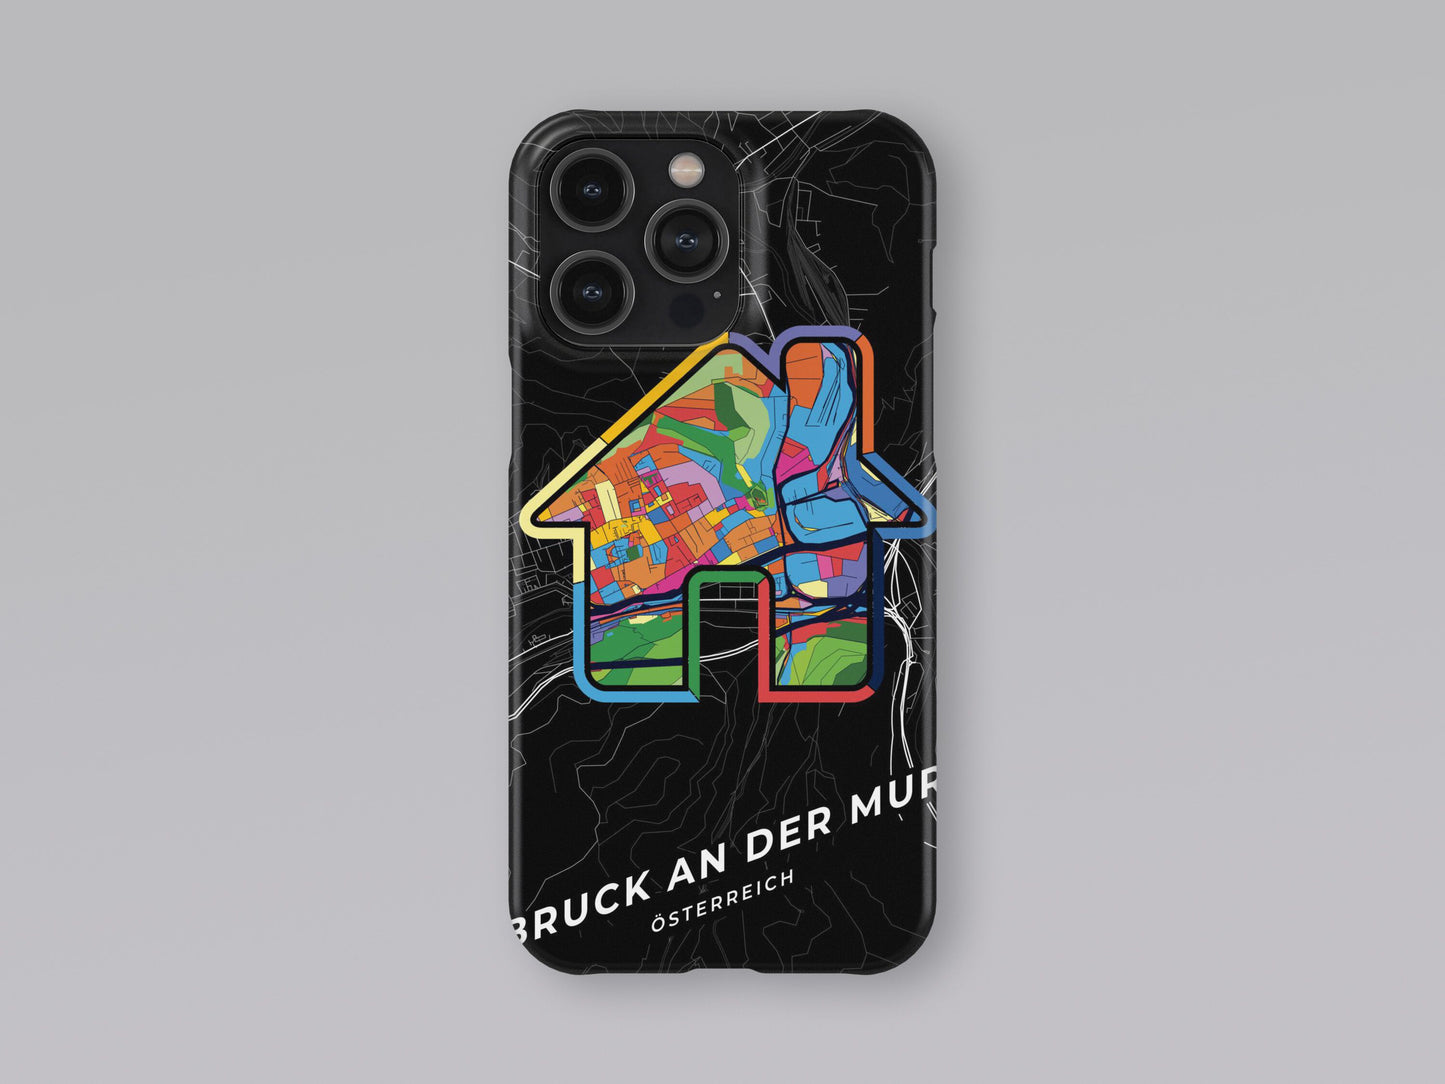 Bruck An Der Mur Österreich slim phone case with colorful icon. Birthday, wedding or housewarming gift. Couple match cases. 3